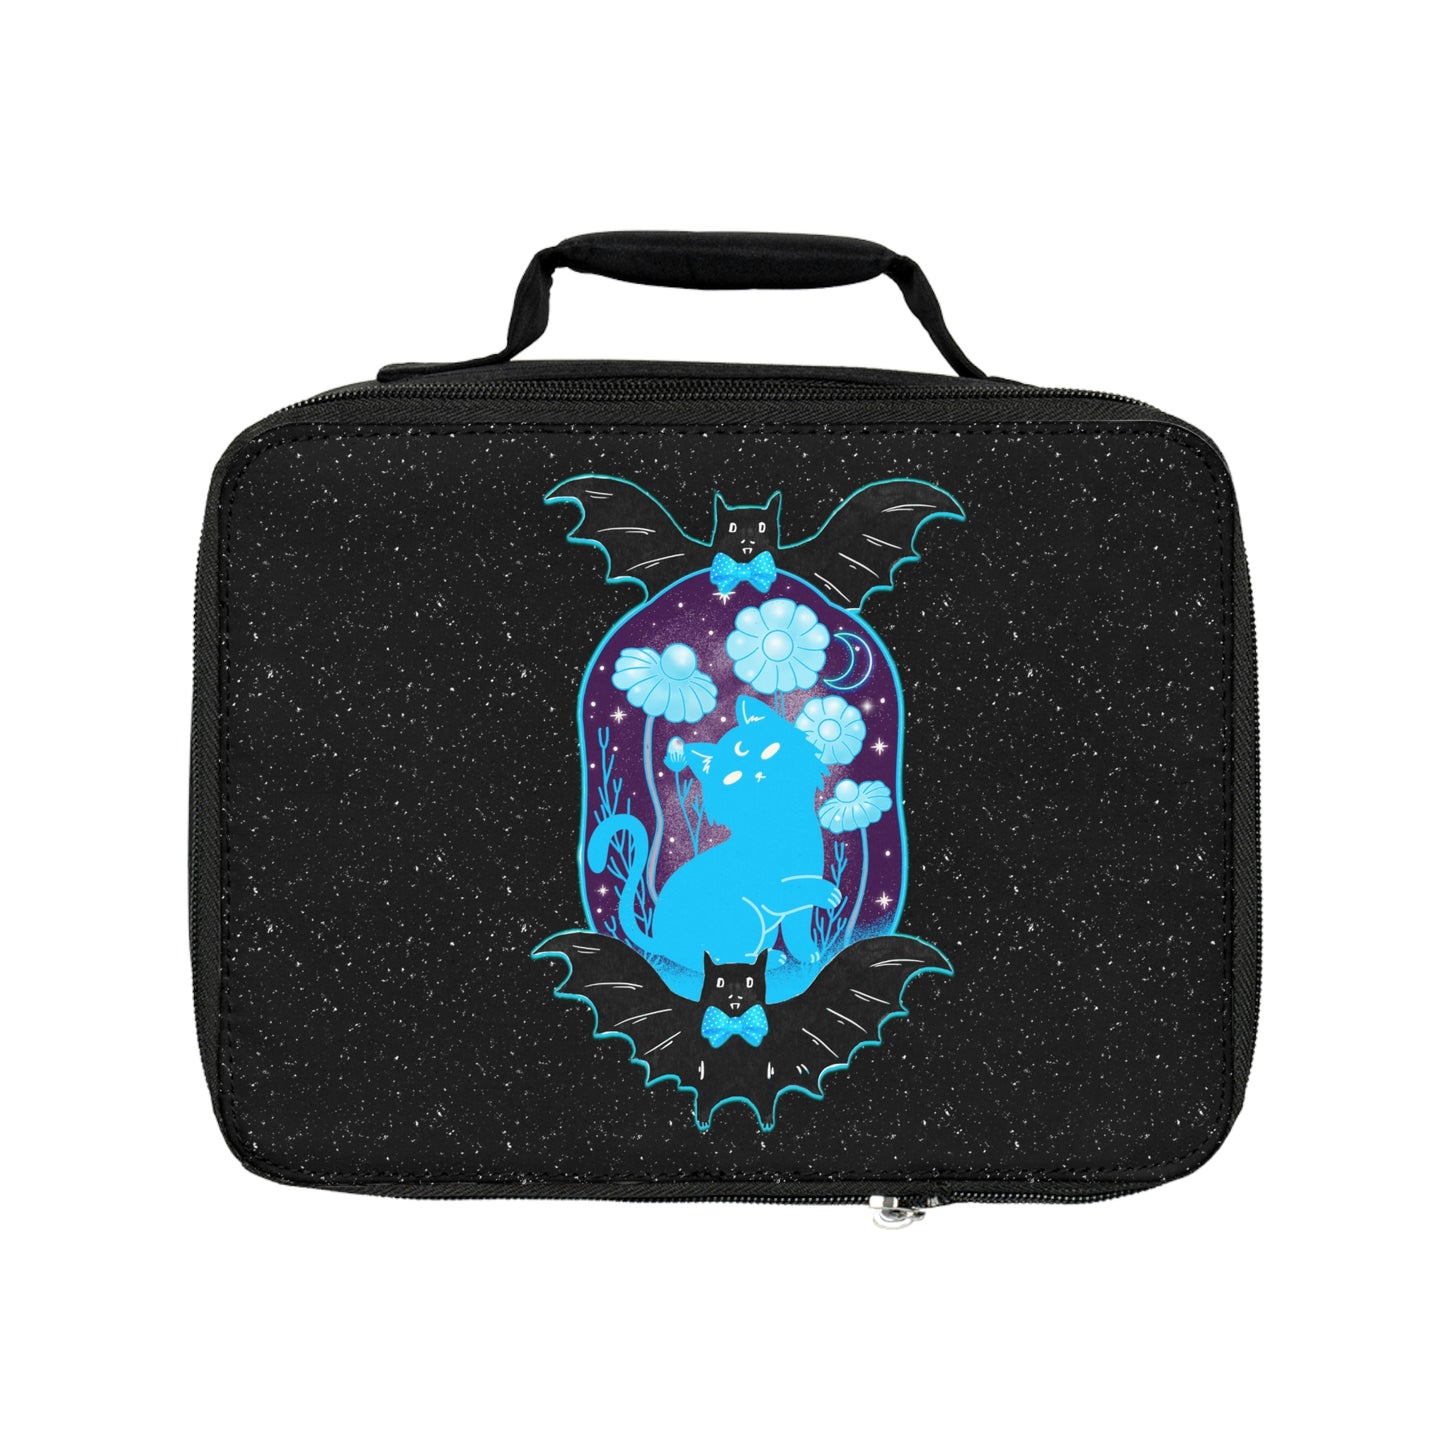 A Little Bit Batty Lunch Bag  | Lunch Box for Adults | Witchy Lunch Box | Witch Lunch Bag | Witchy Lunch Box | Witchcore